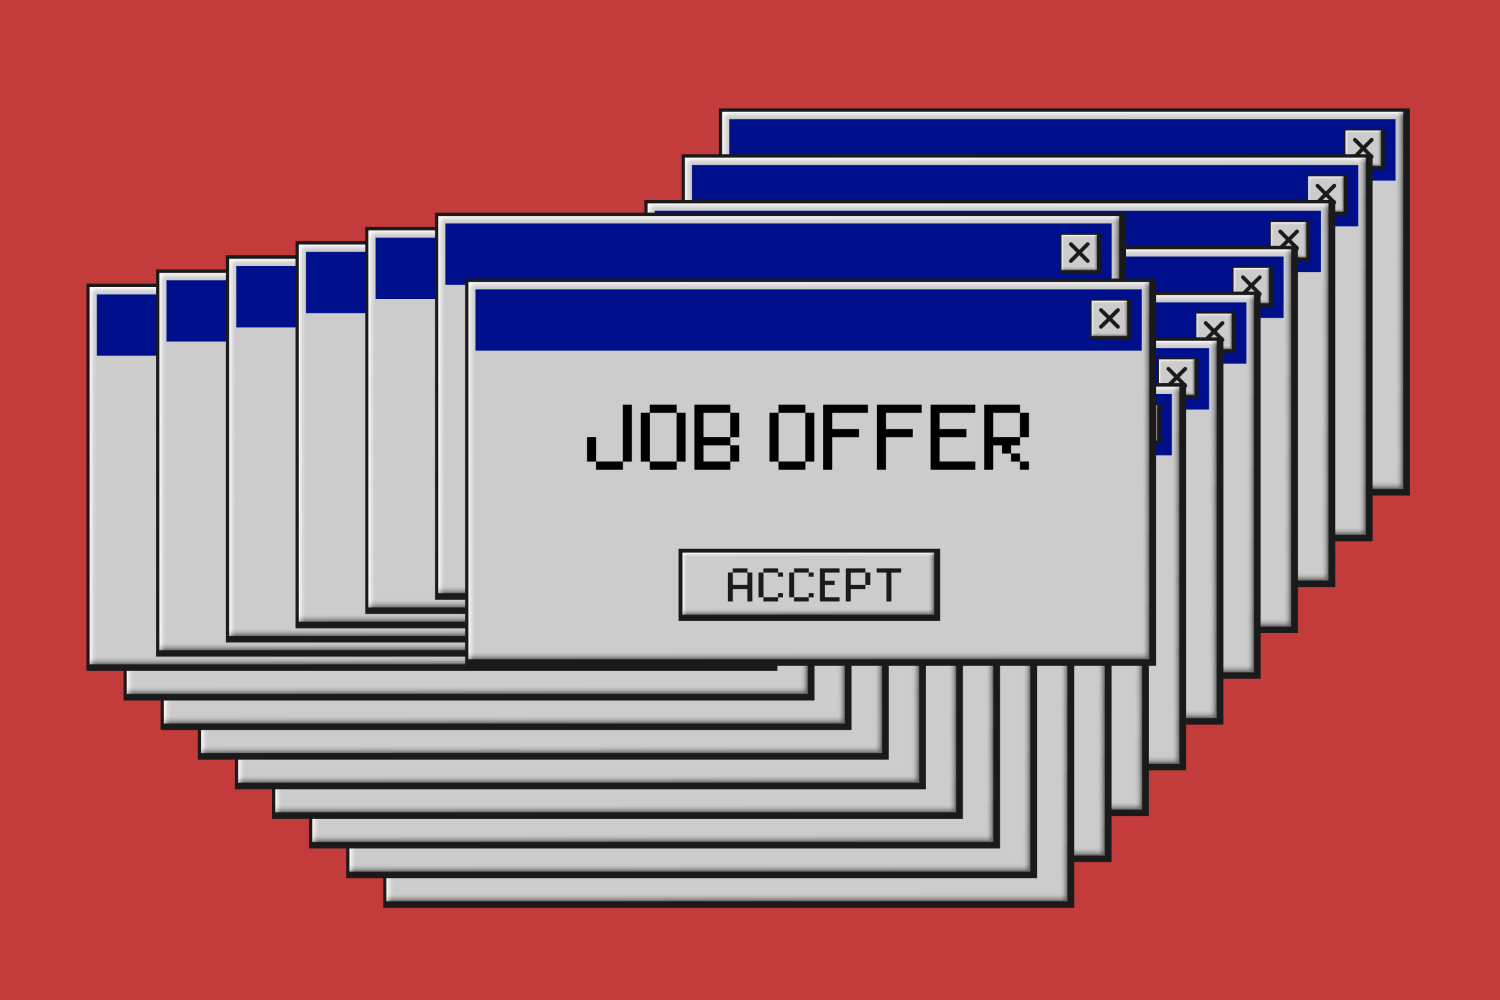 An image of the text "job offer" on the screen of a computer